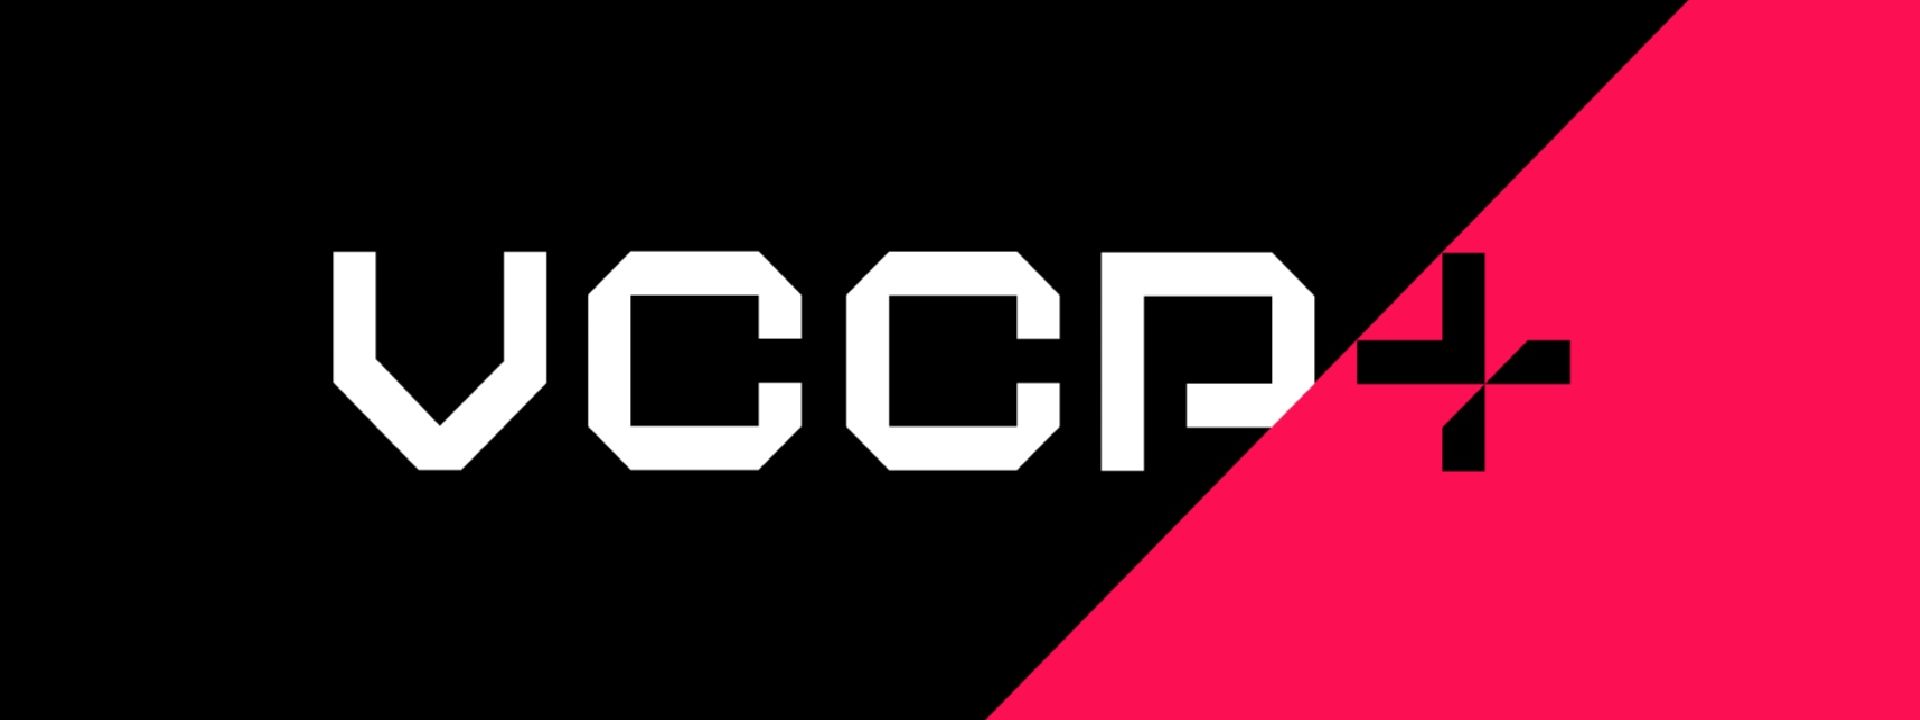 VCCP launches global gaming proposition VCCP+